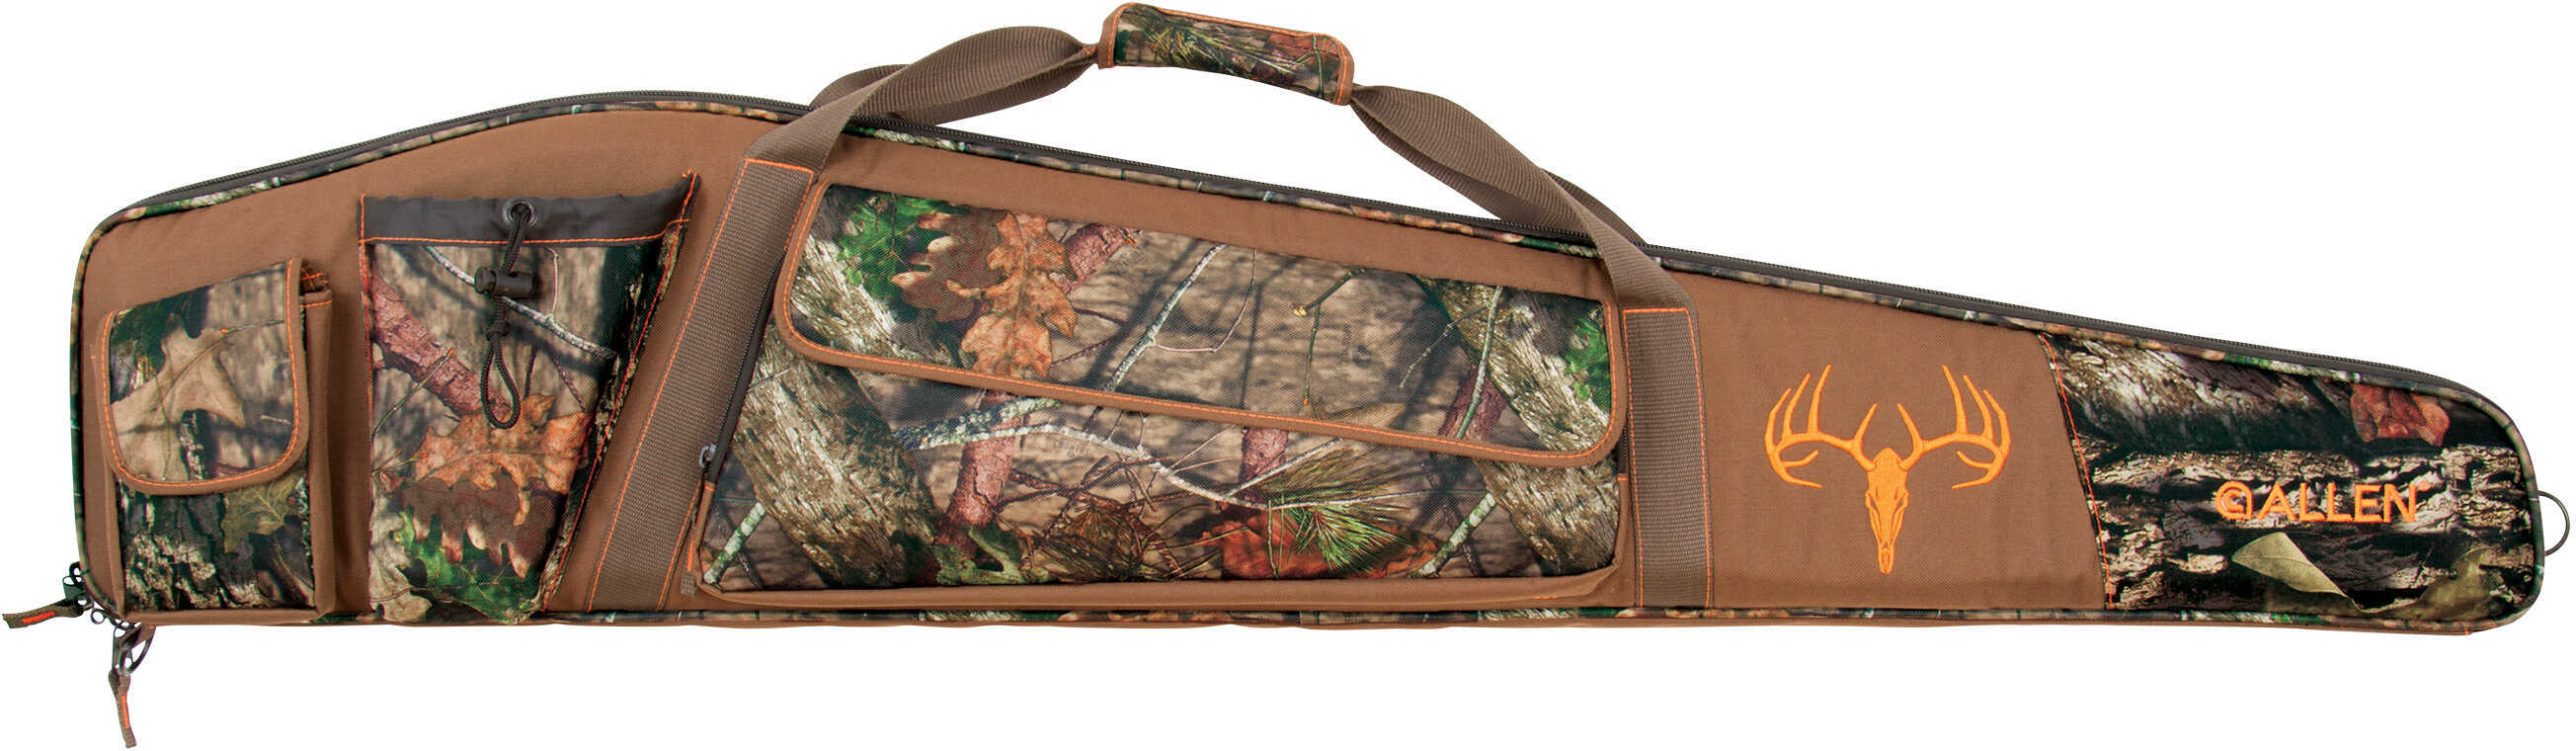 Bruiser GearFit Whitetail Rifle Case 48 in. Model: 945-48